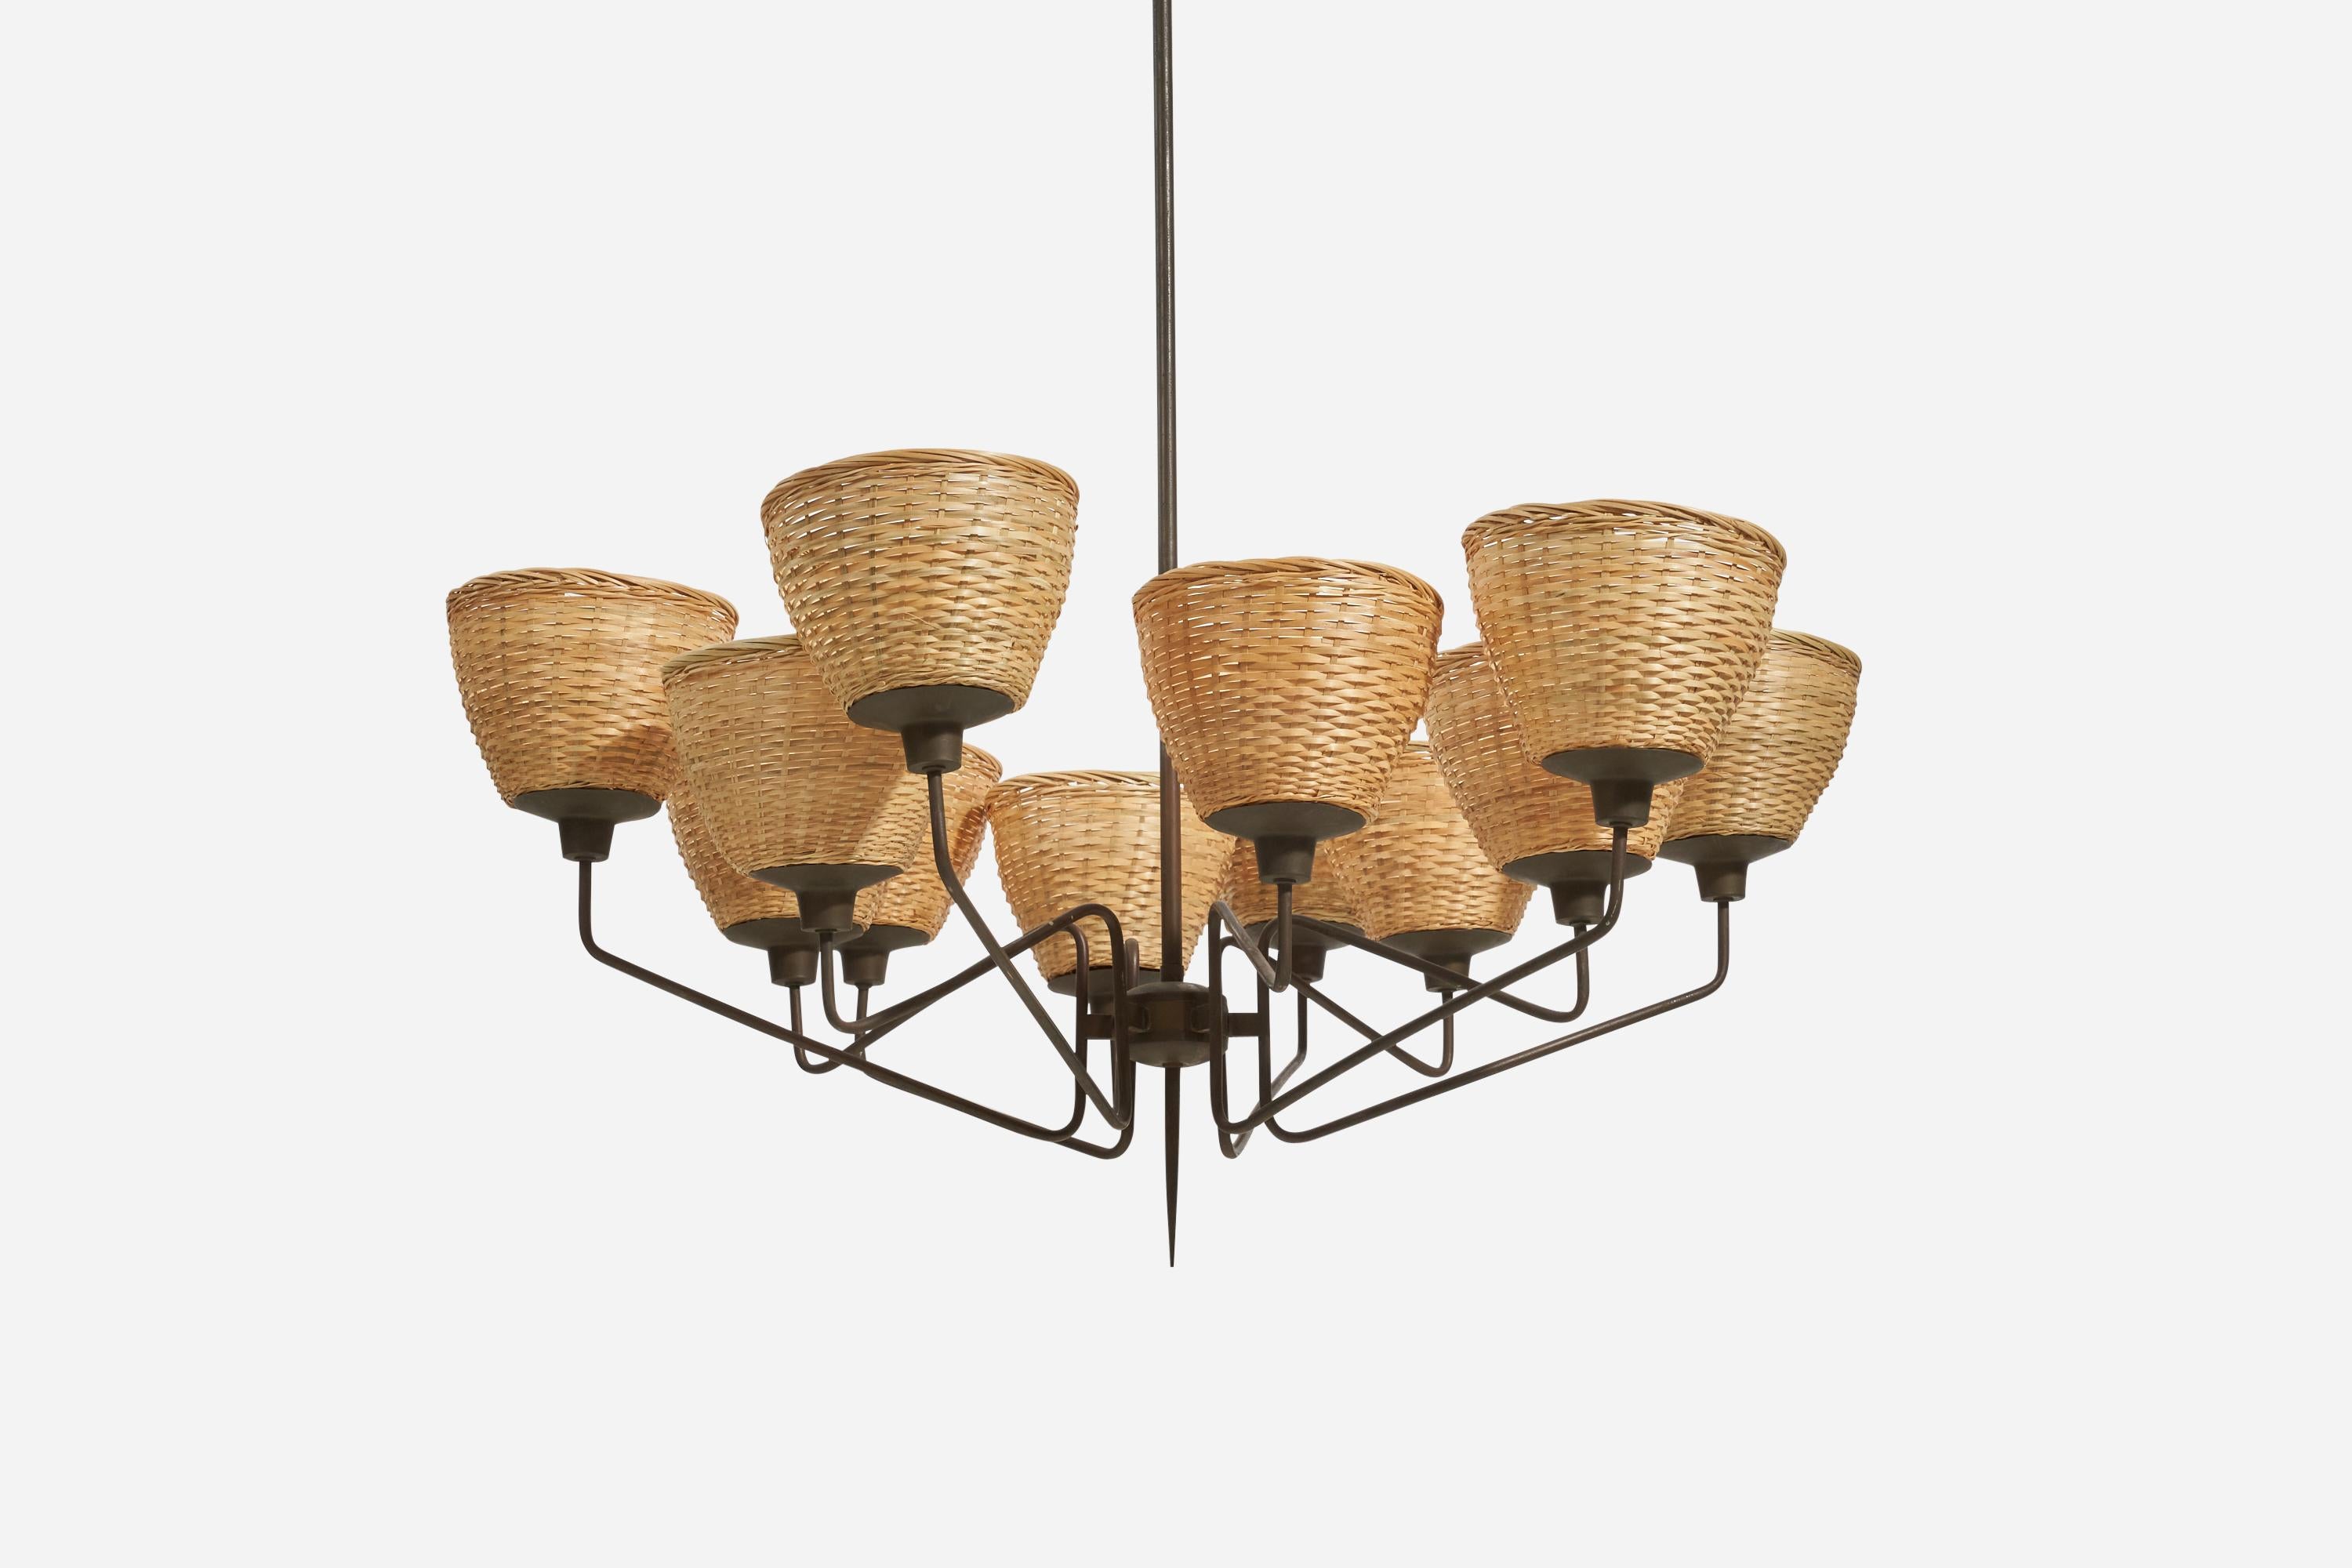 A sizeable brass and rattan chandelier; design and production attributed to Stilnovo, Italy, 1960s. 

There is no maximum wattage stated on the fixture.